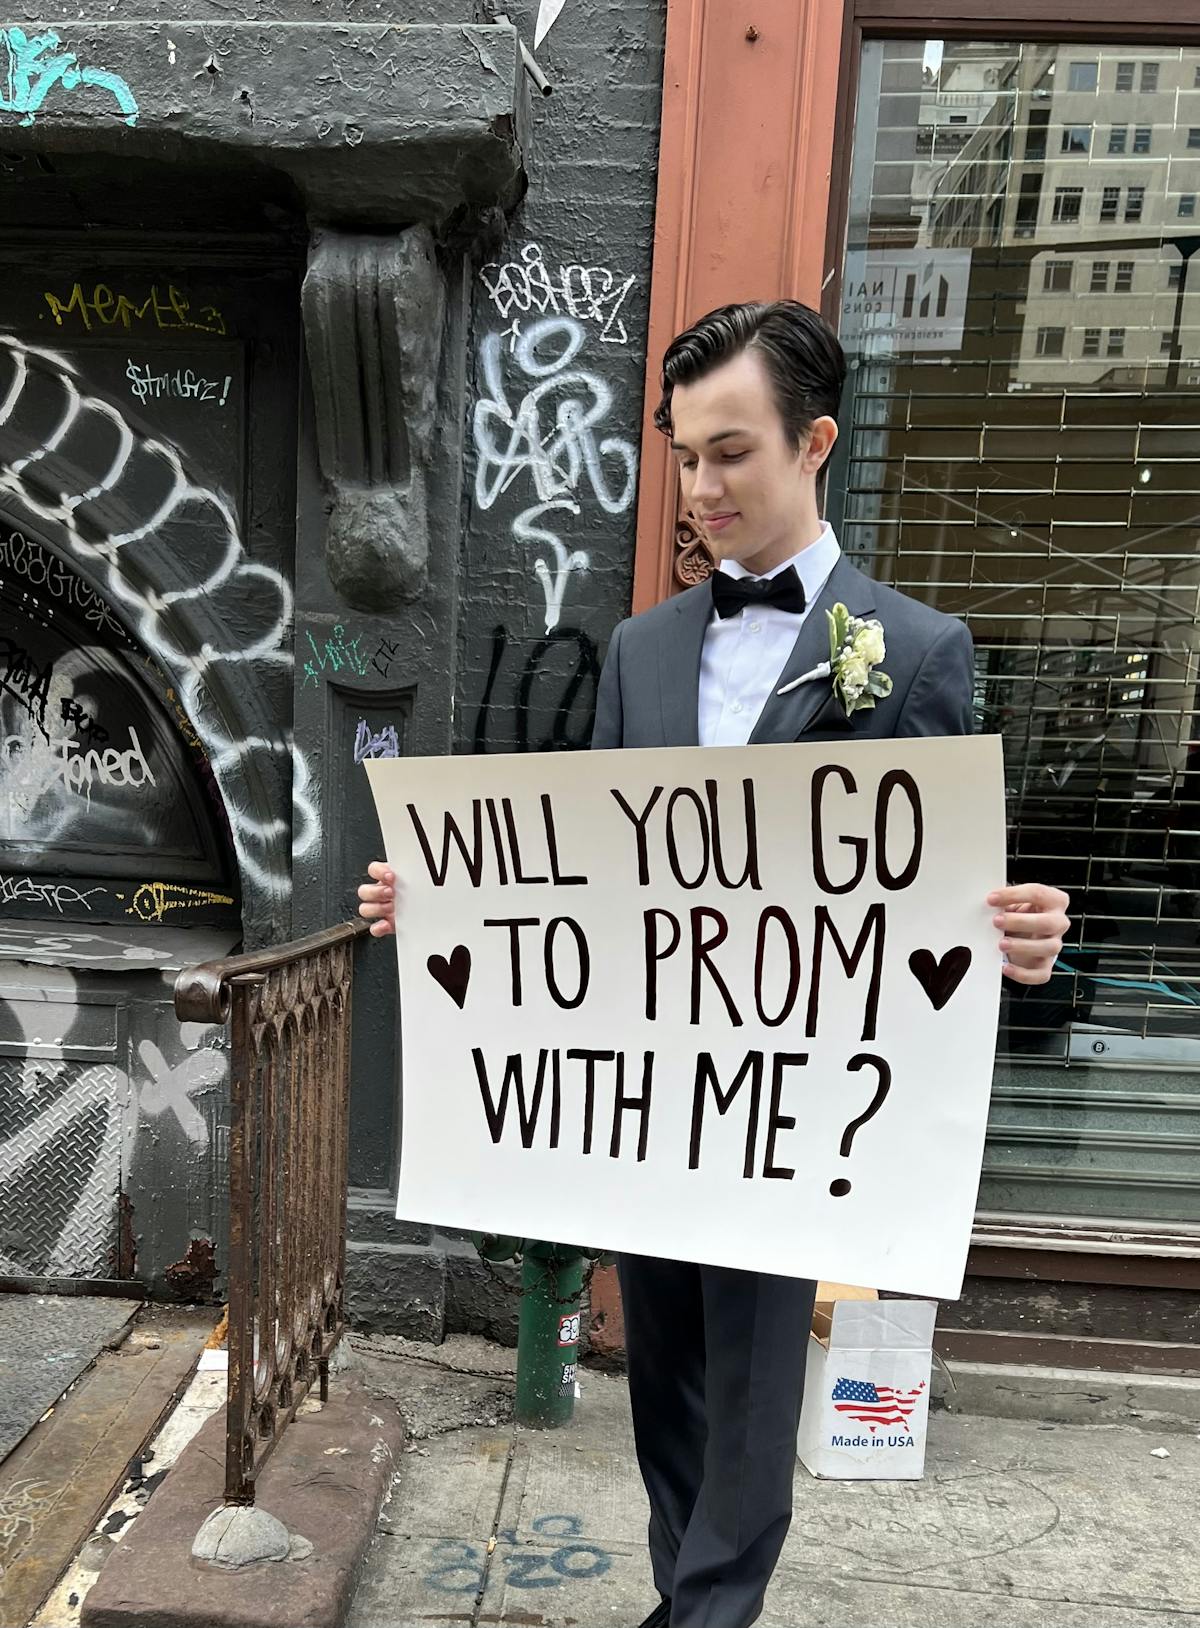 High school promposal sign idea dressed up wearing gray prom suit on city street.